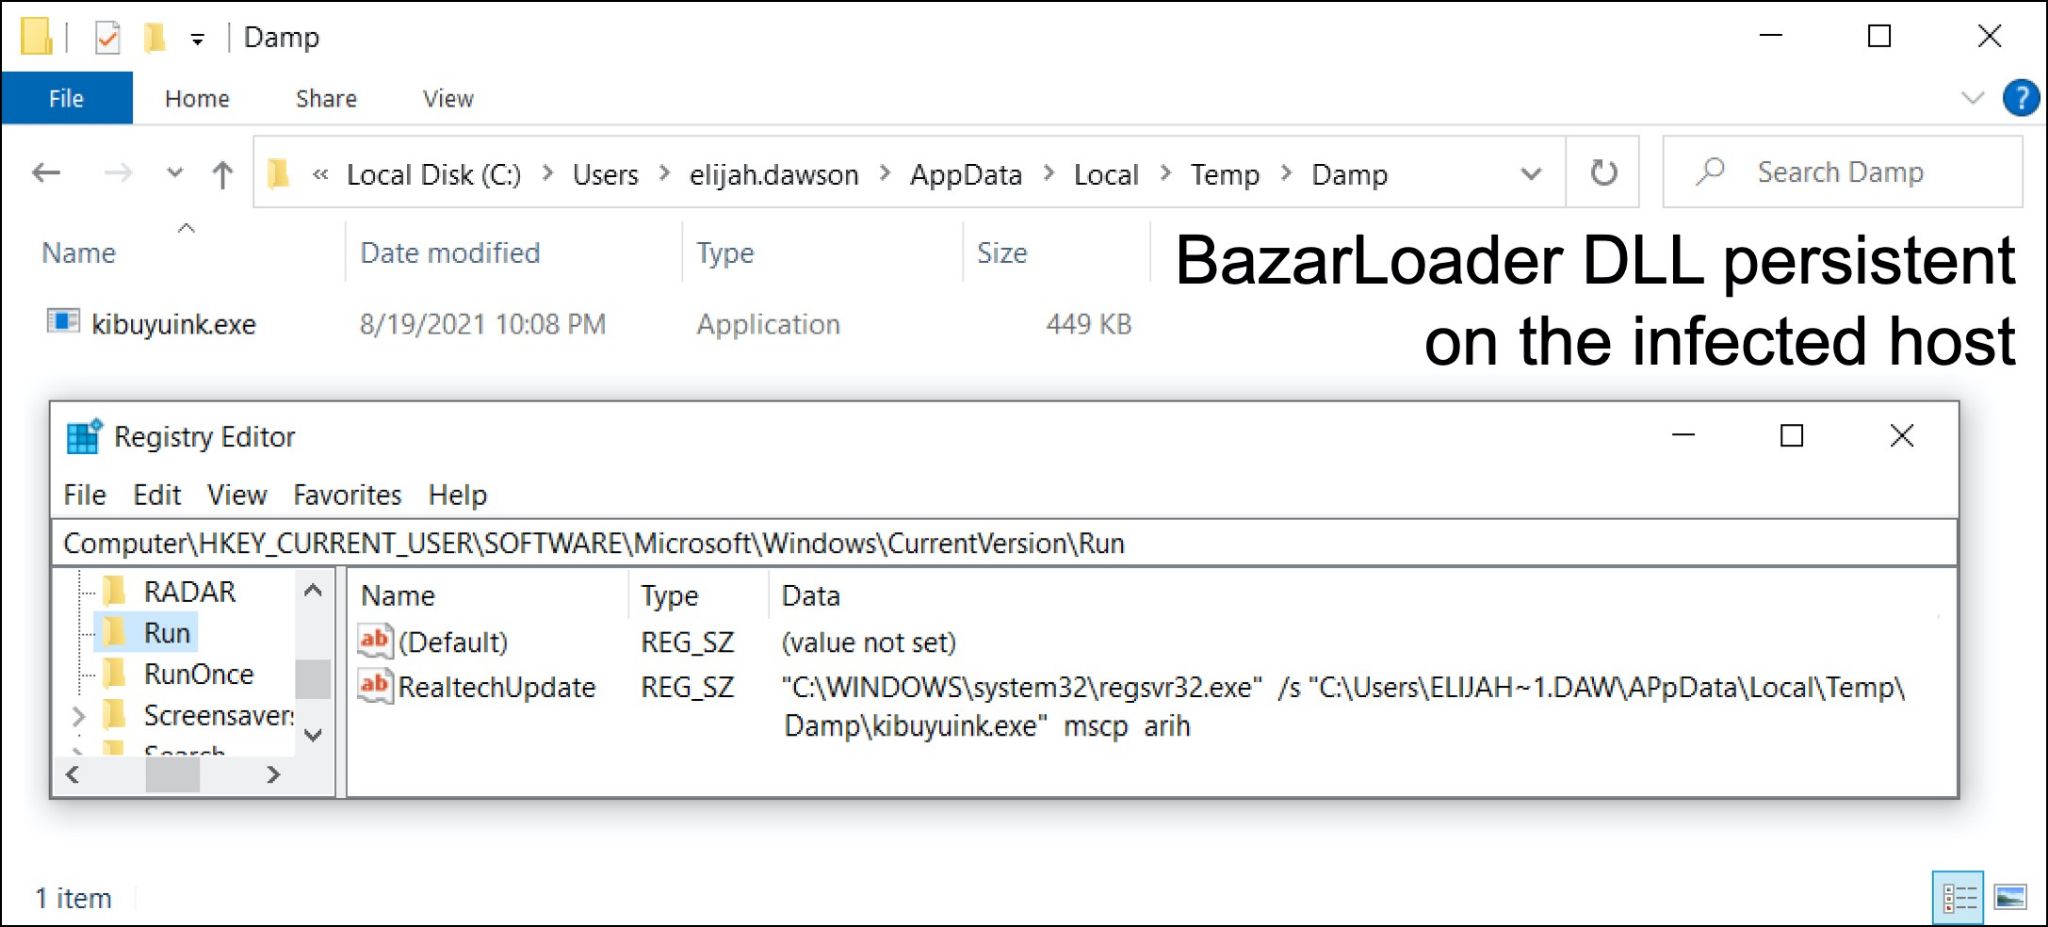 BazarLoader DLL persistent on the infected host, as shown in the screenshot. 